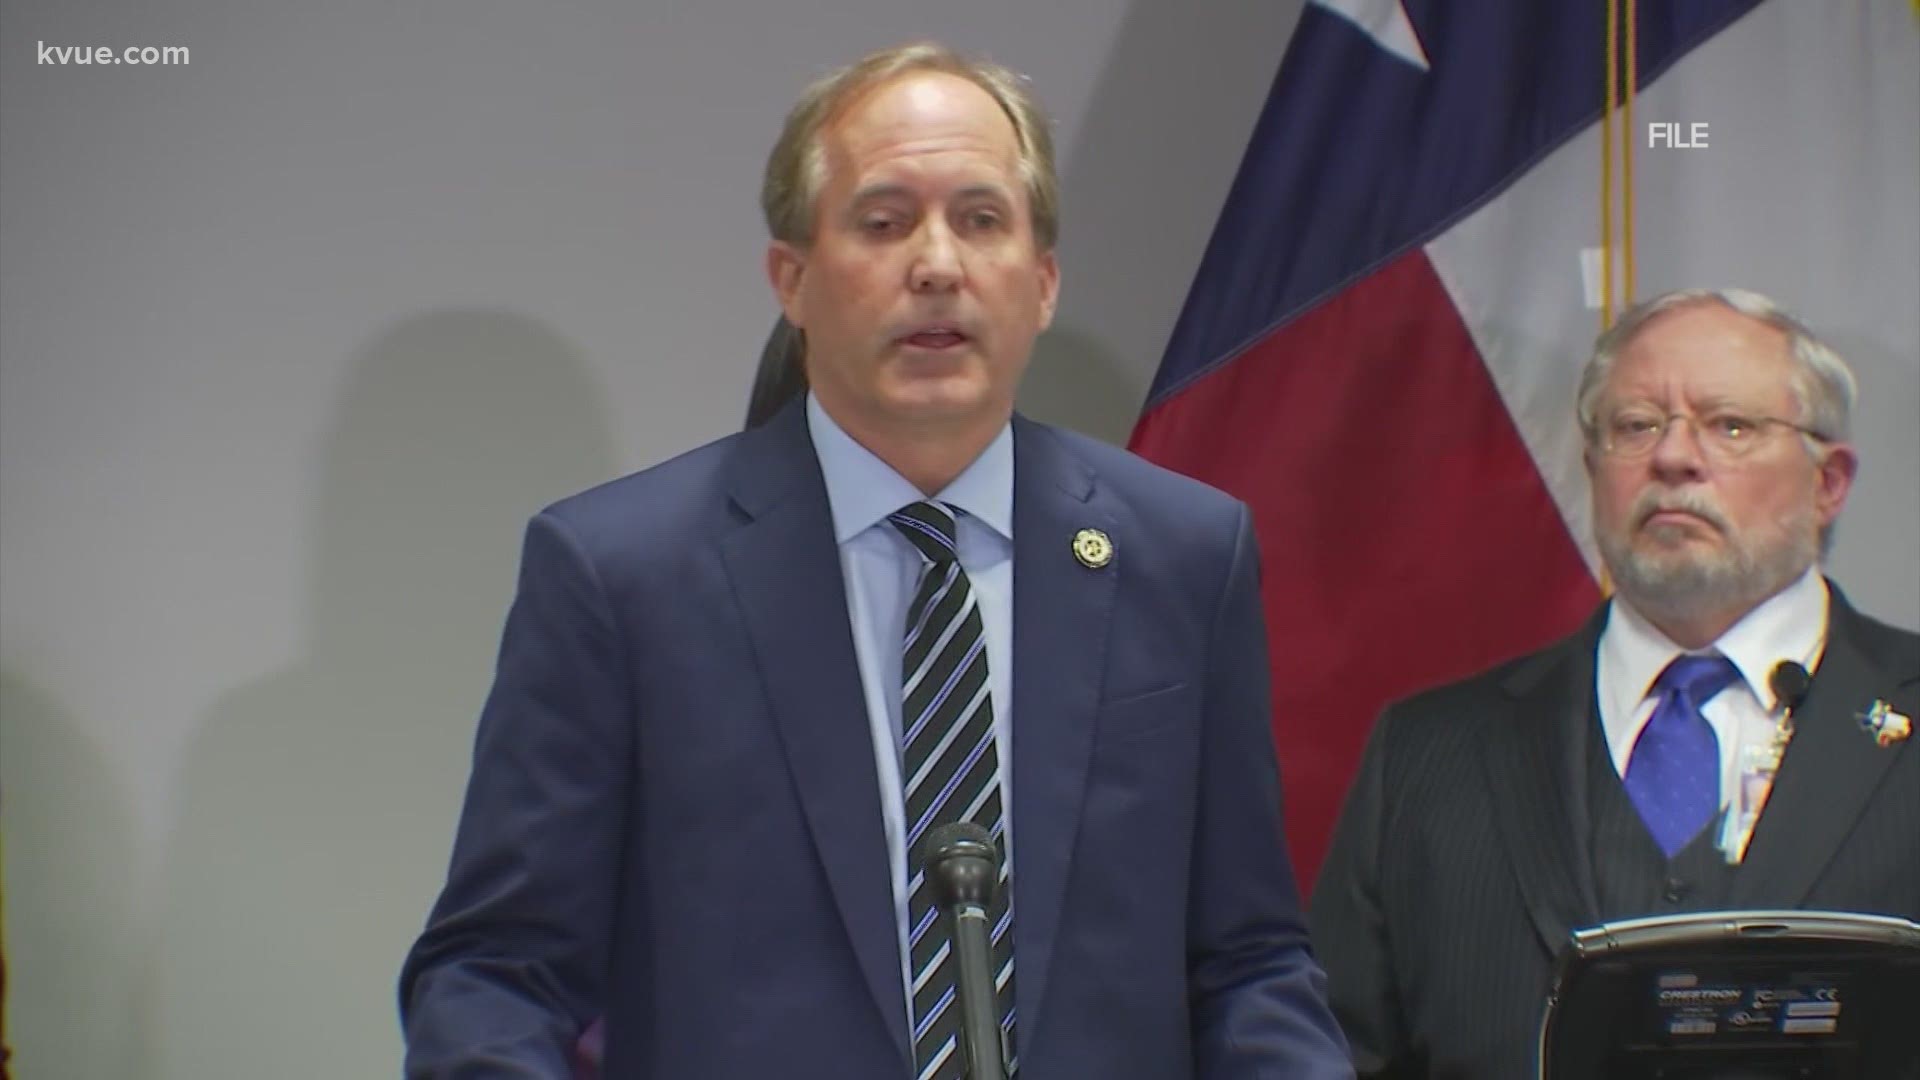 A Texas judge has rejected a bid to dismiss a lawsuit against Attorney General Ken Paxton filed by whistleblowers.